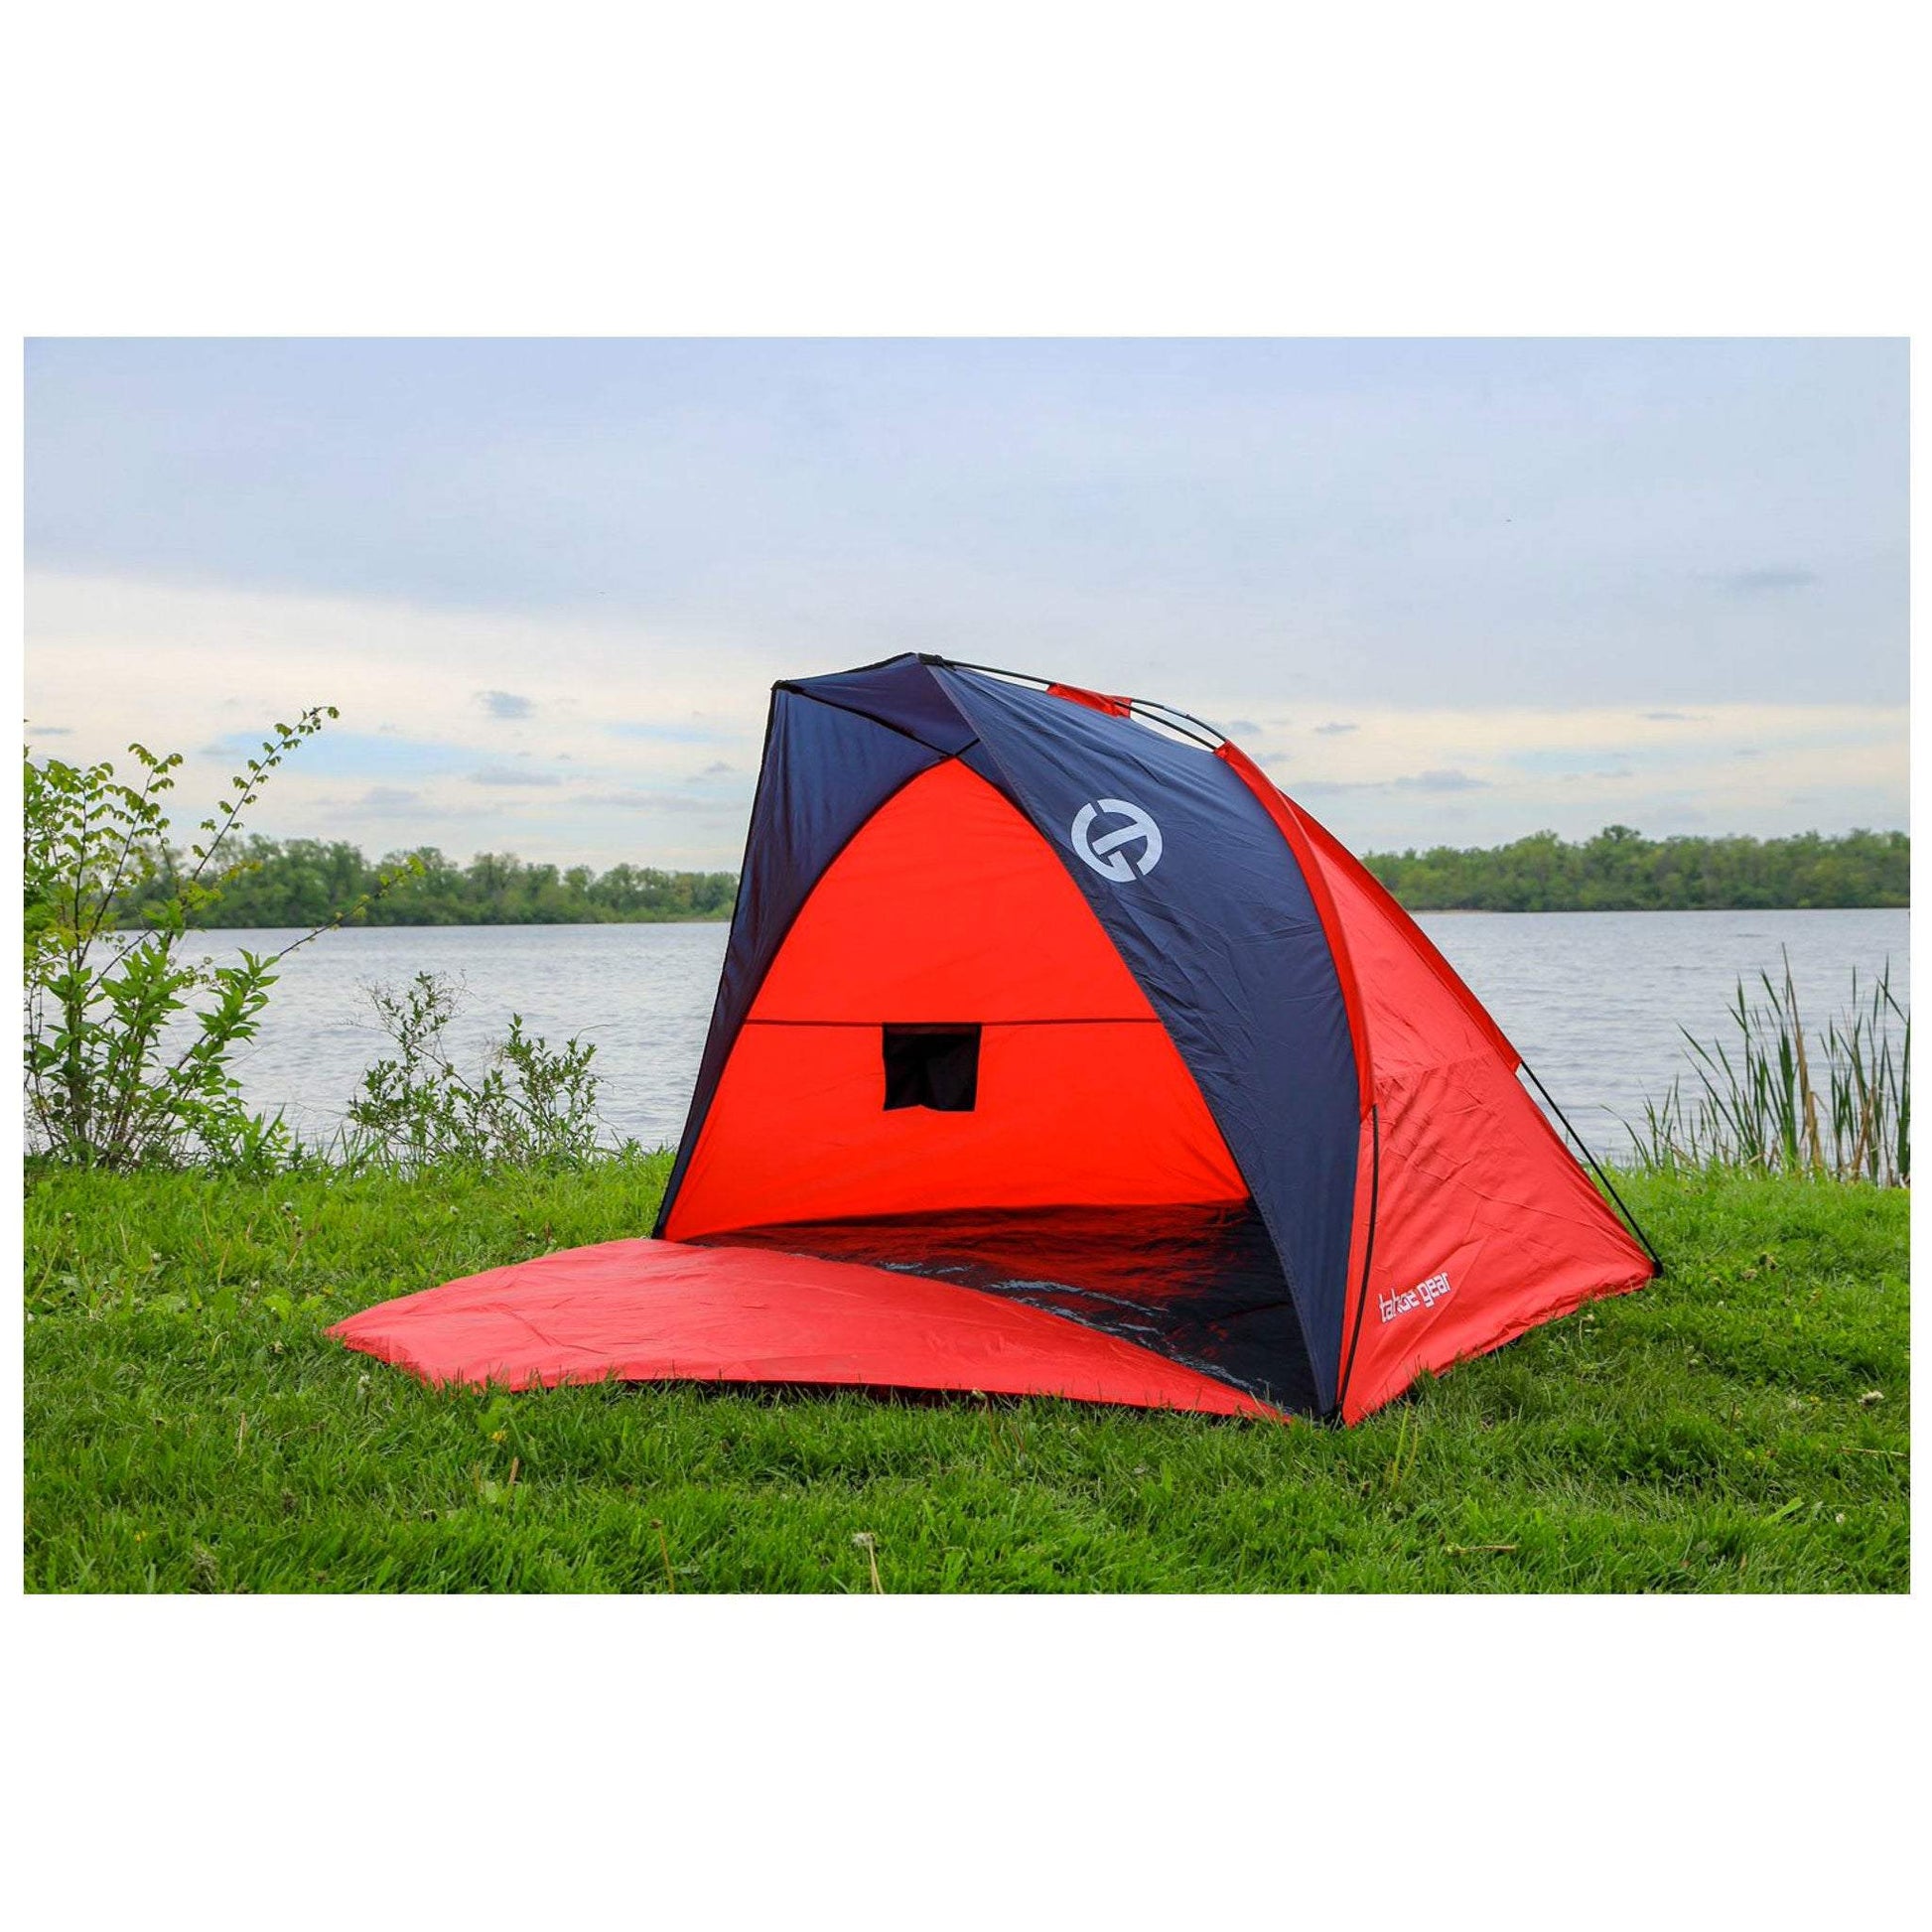 Tahoe Gear Cruz Bay Summer Sun Shelter and Beach Shade Tent Canopy - Coral Red - Selzalot